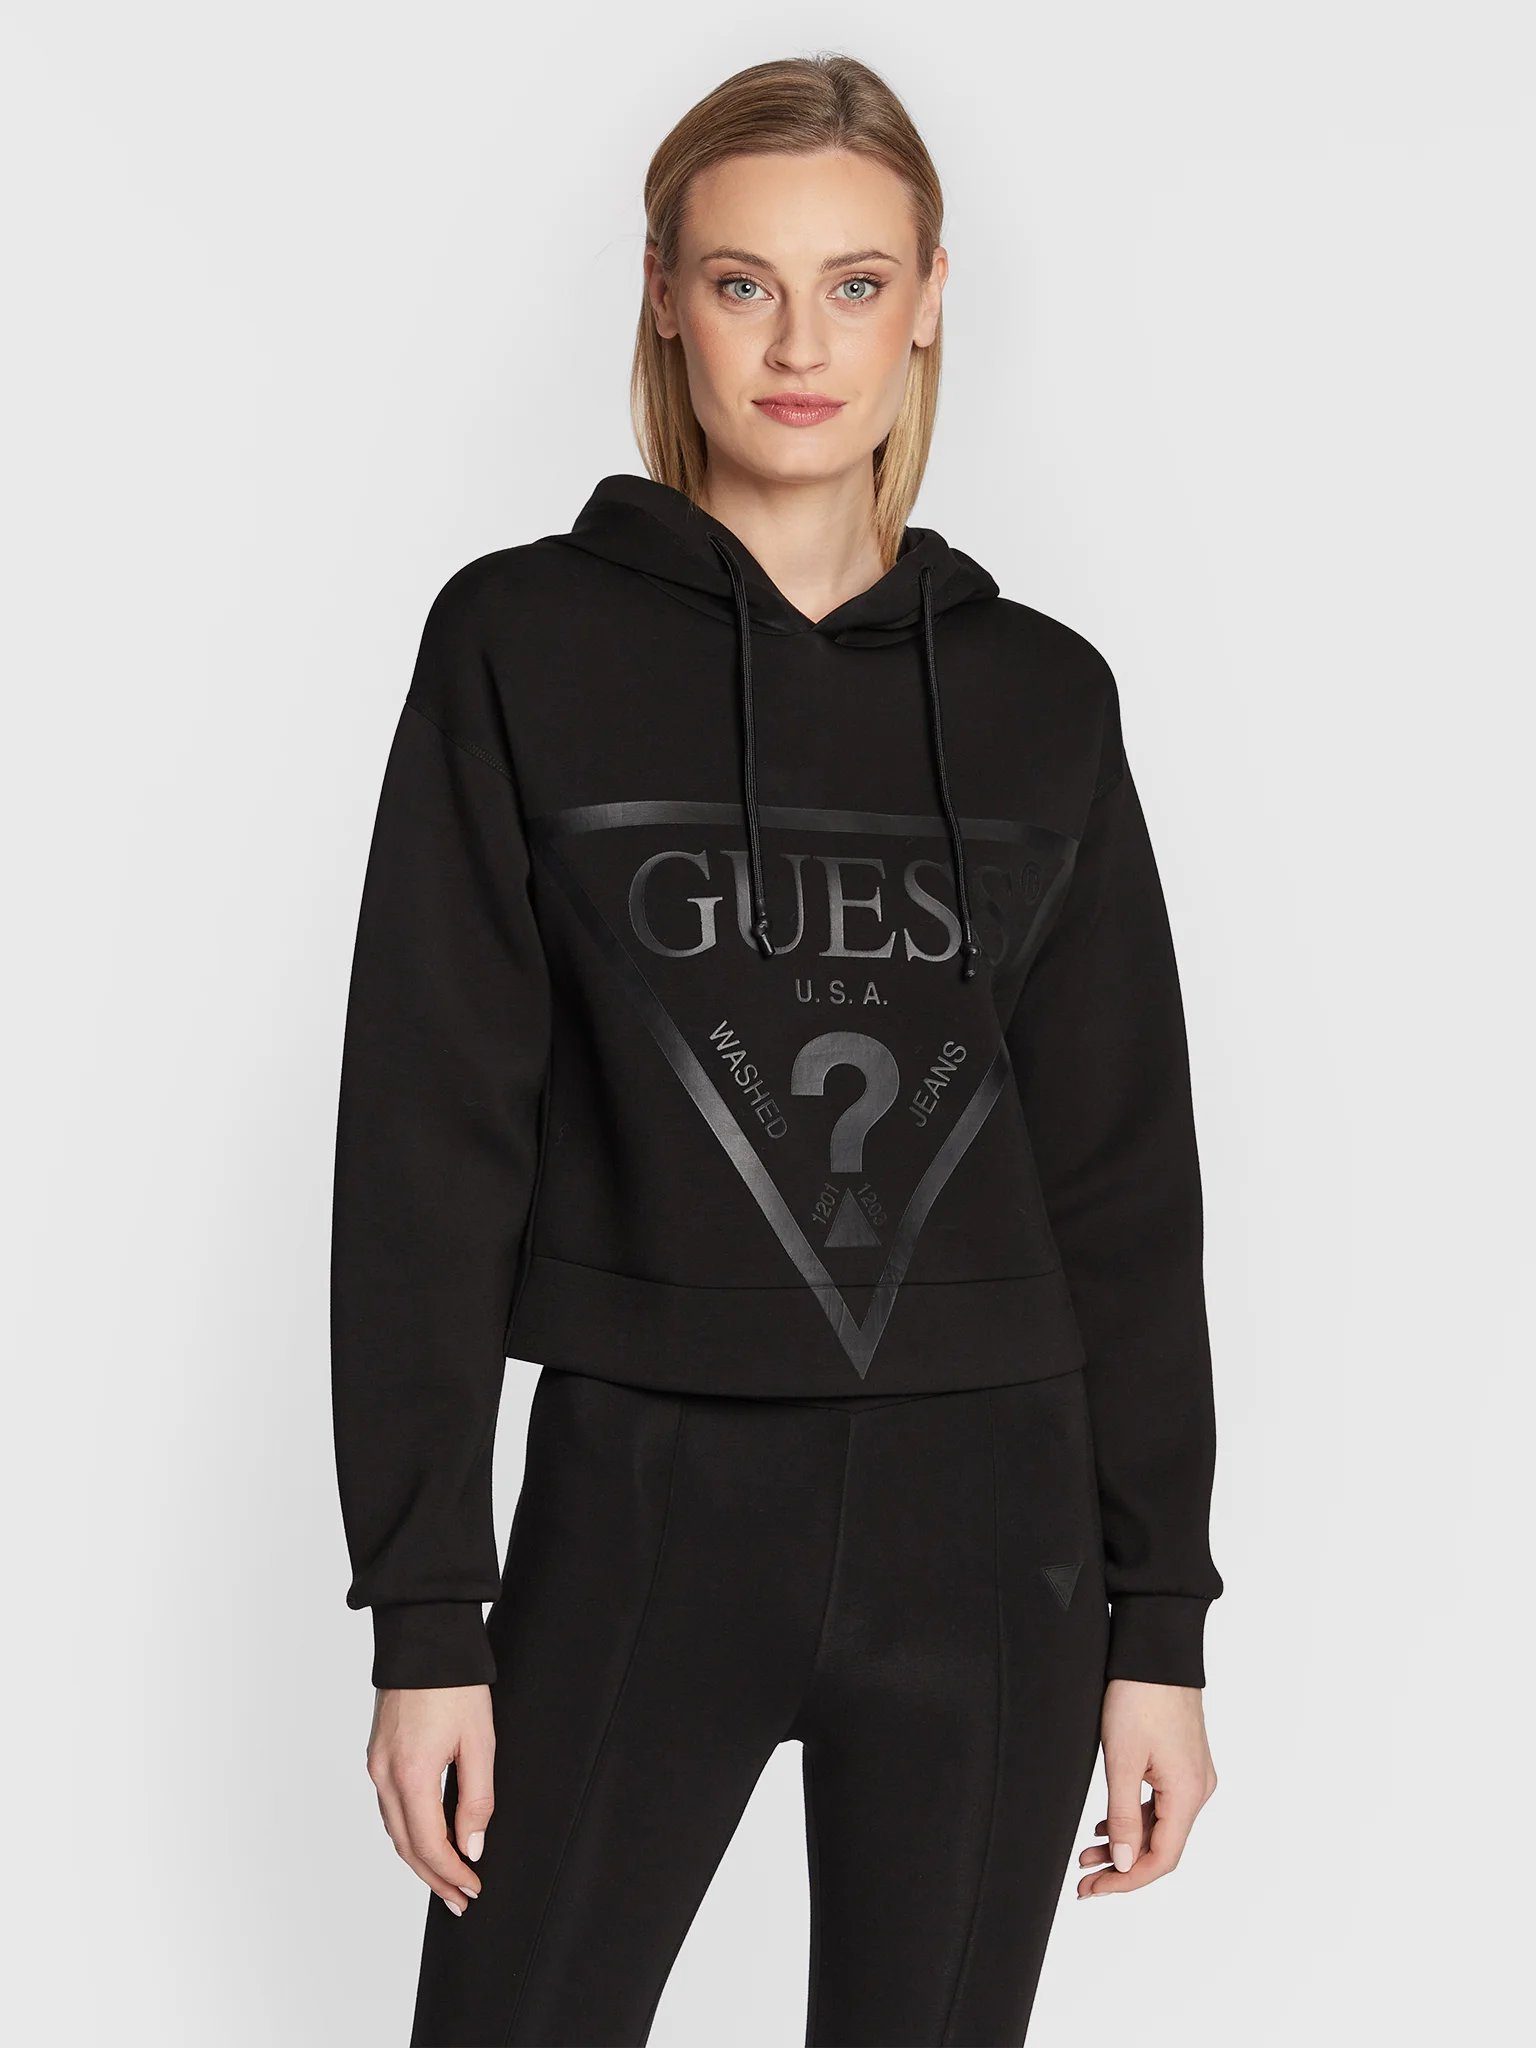 Guess Collection Sweatshirt Jet Black A996